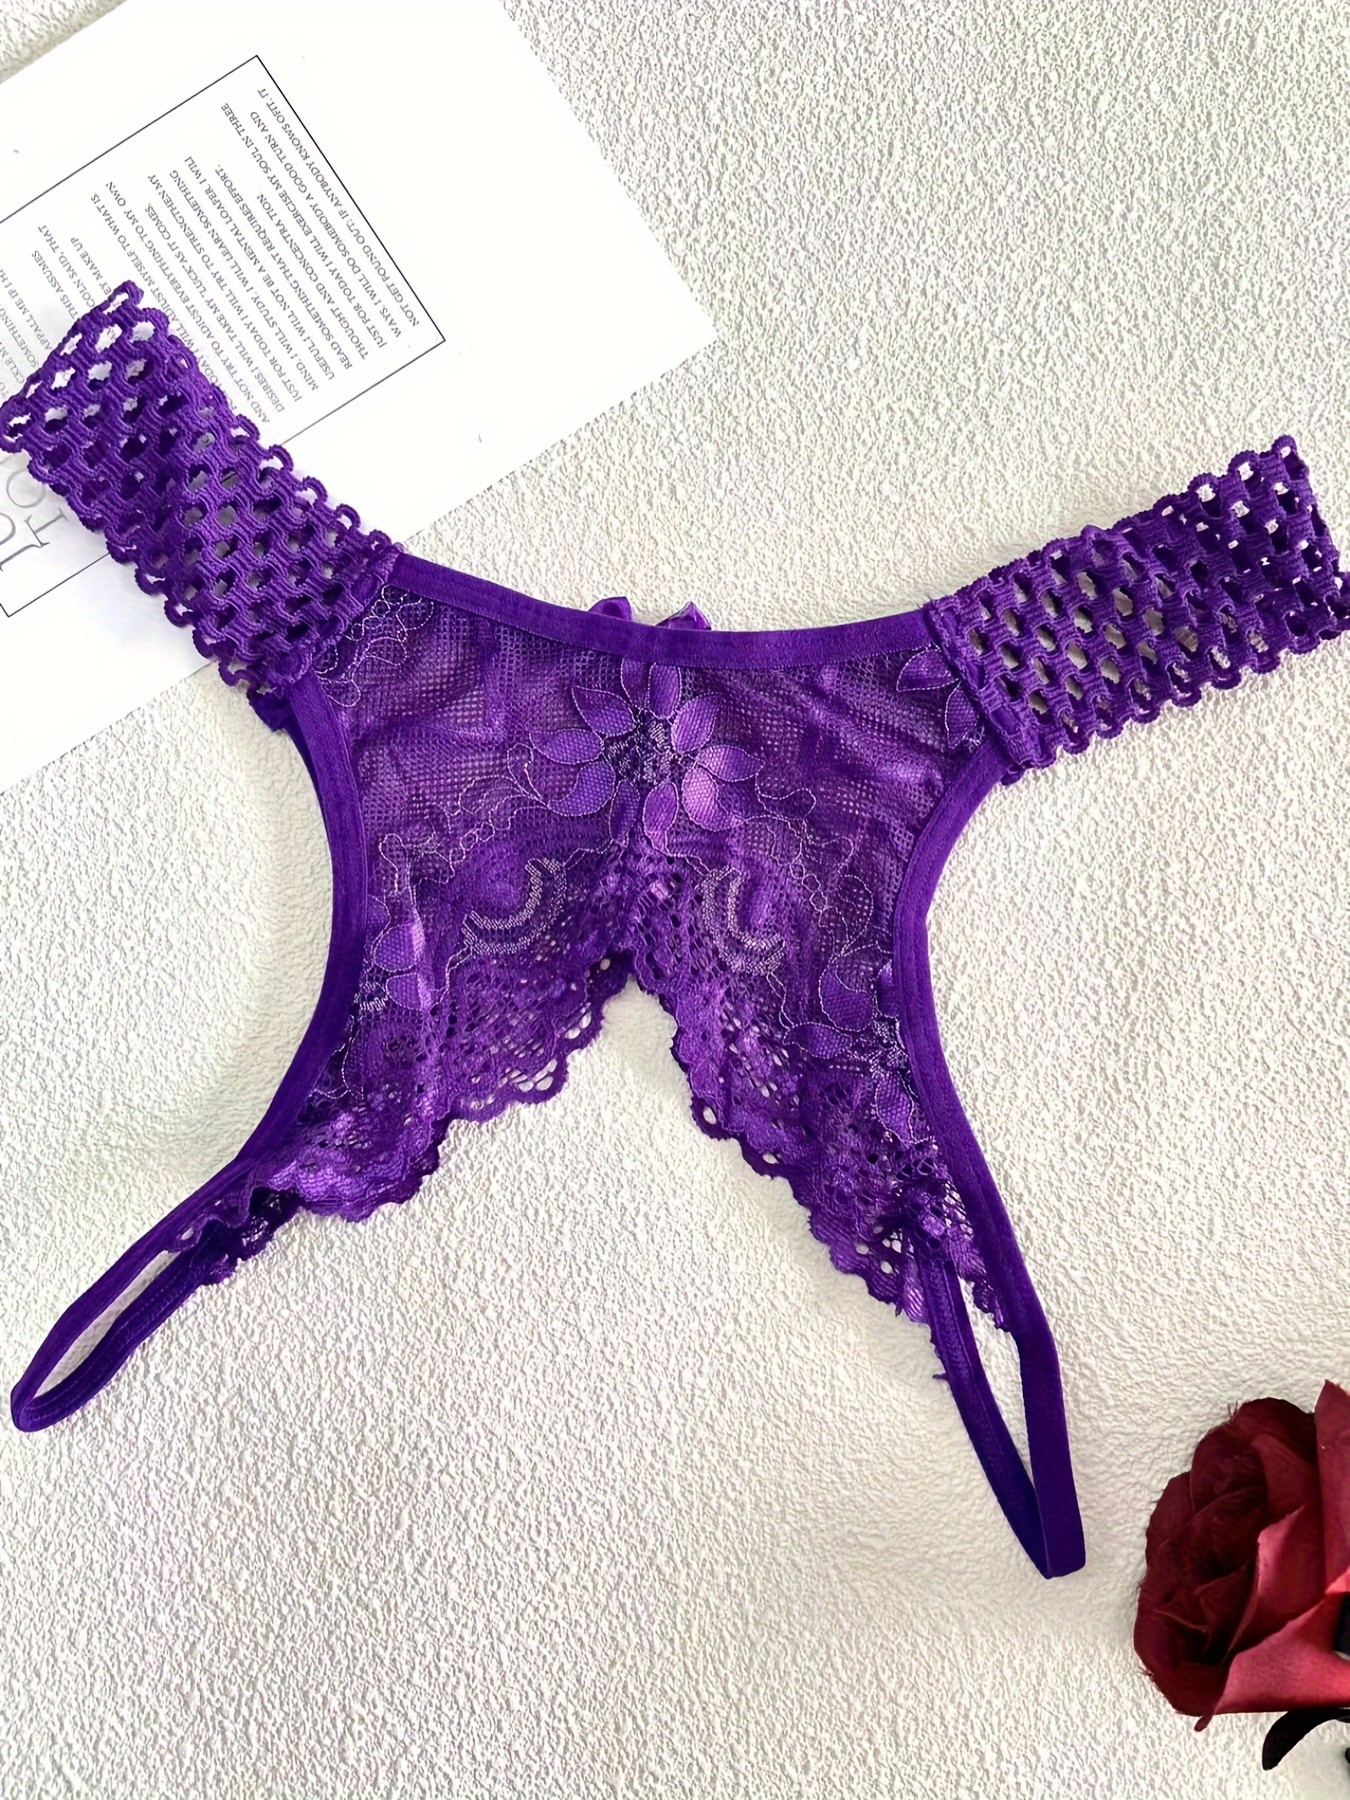 A-One Dolce 04 Sheer Violet Lace Embroidered Open Crotch Panties 1